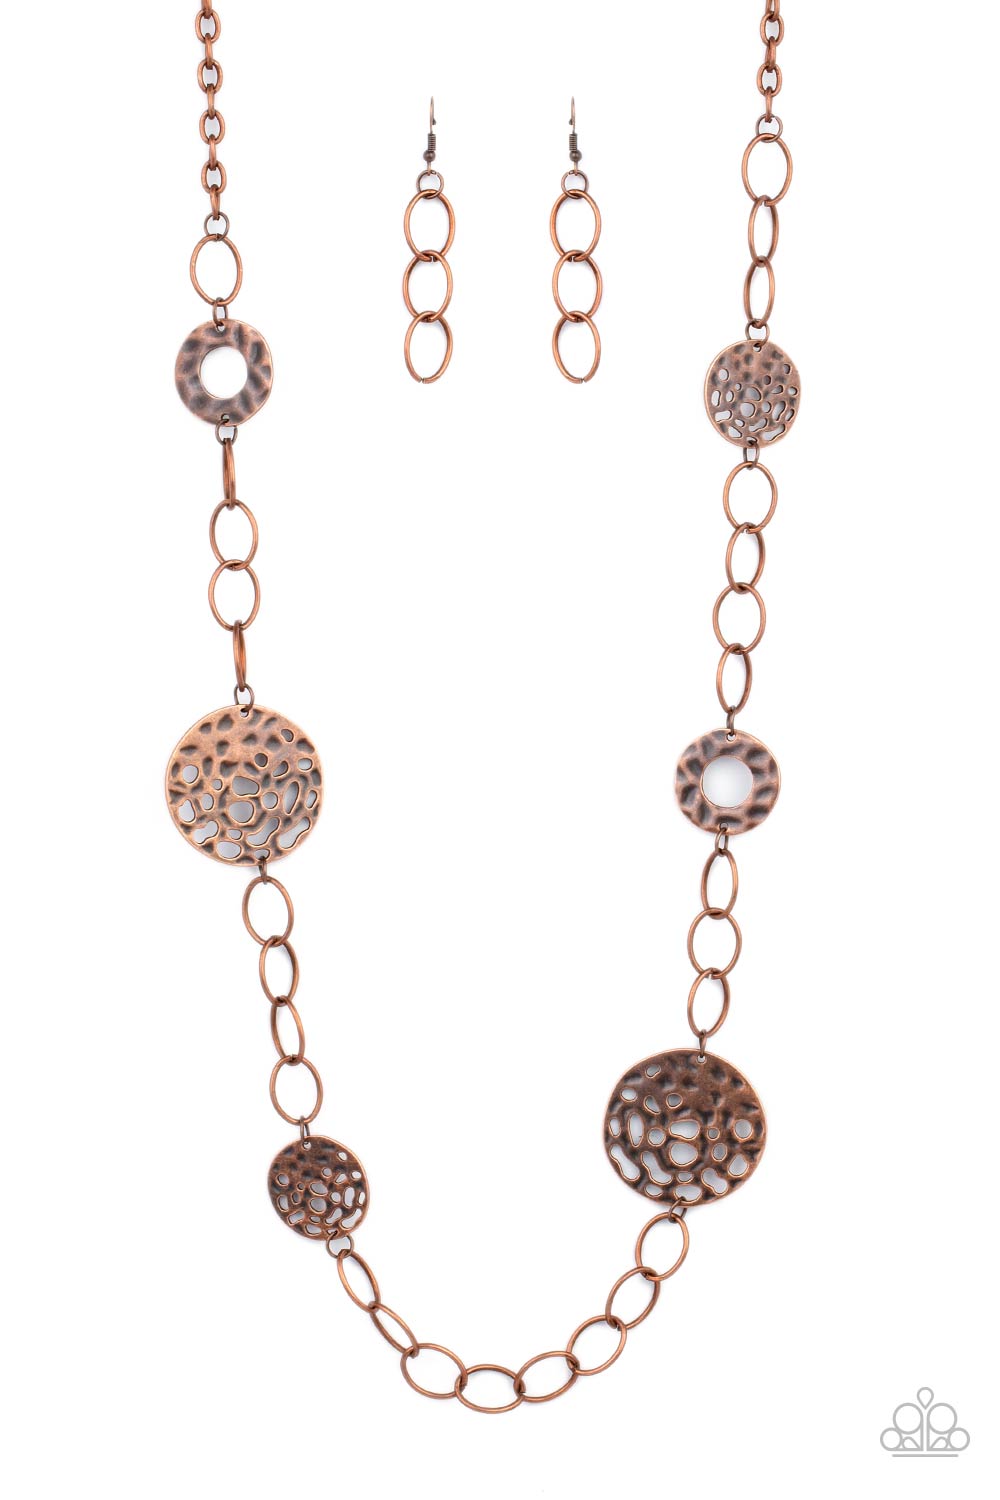 HOLEY Relic - Copper necklace 2118